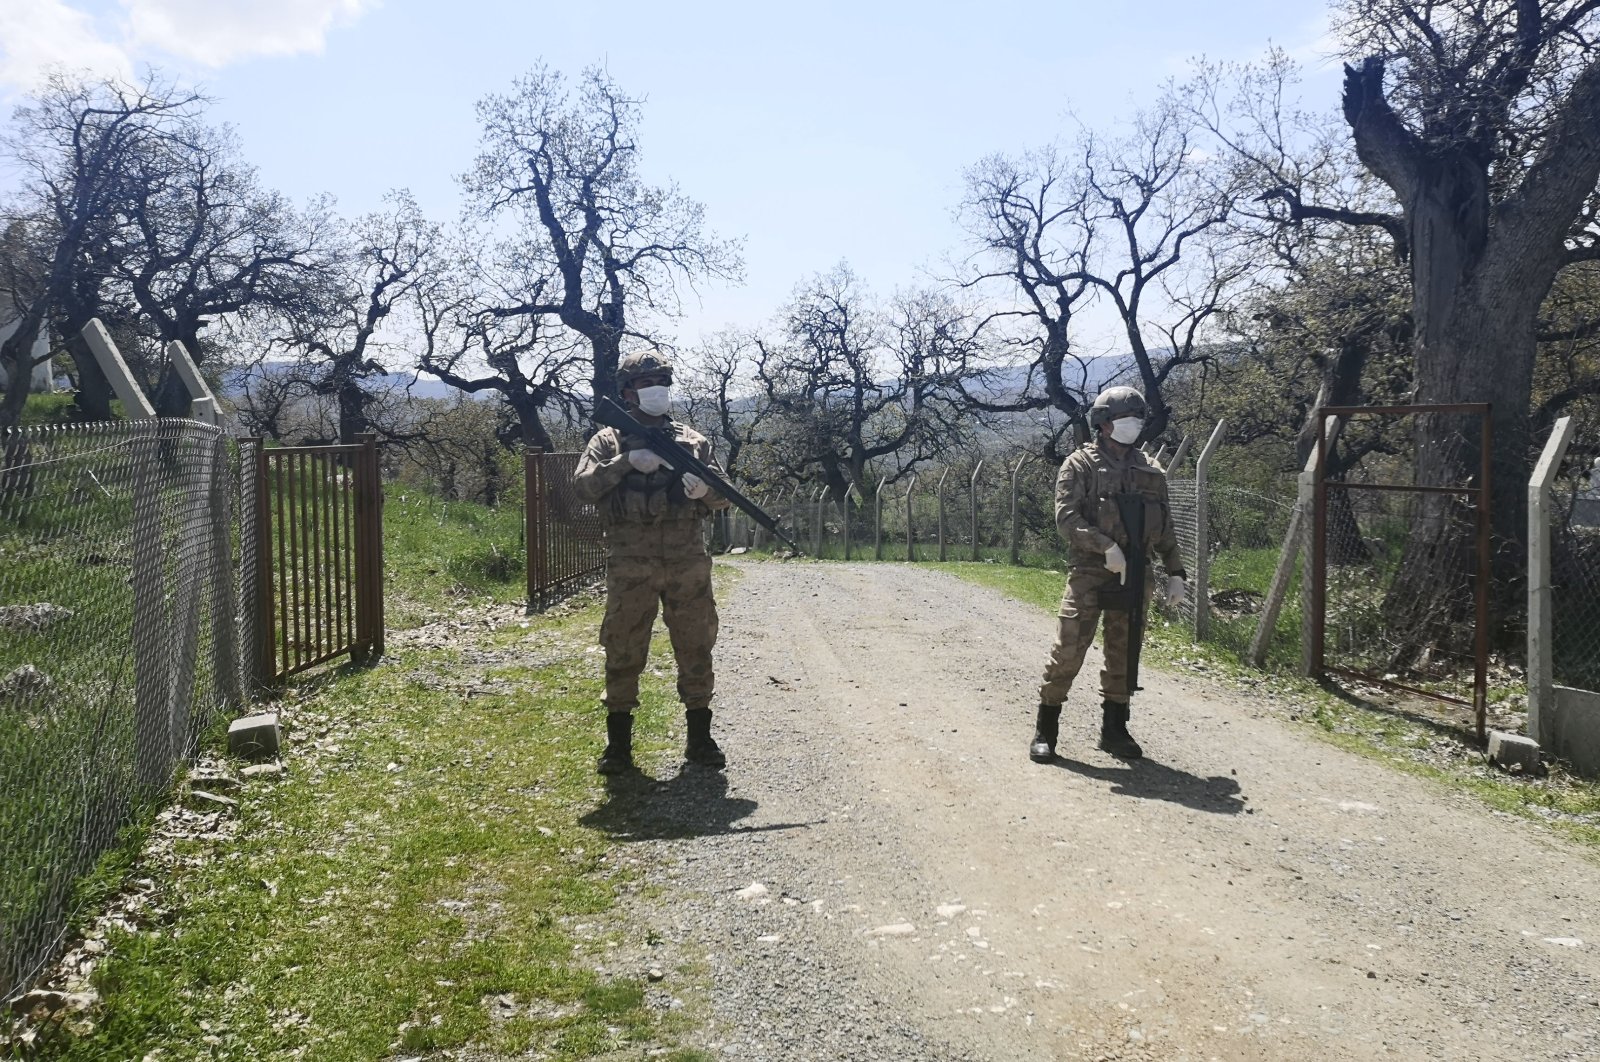 Security forces were dispatched to the area after PKK terrorists detonated a roadside bomb in Diyarbakır, Turkey, Wednesday, April 8, 2020. (DHA Photo)